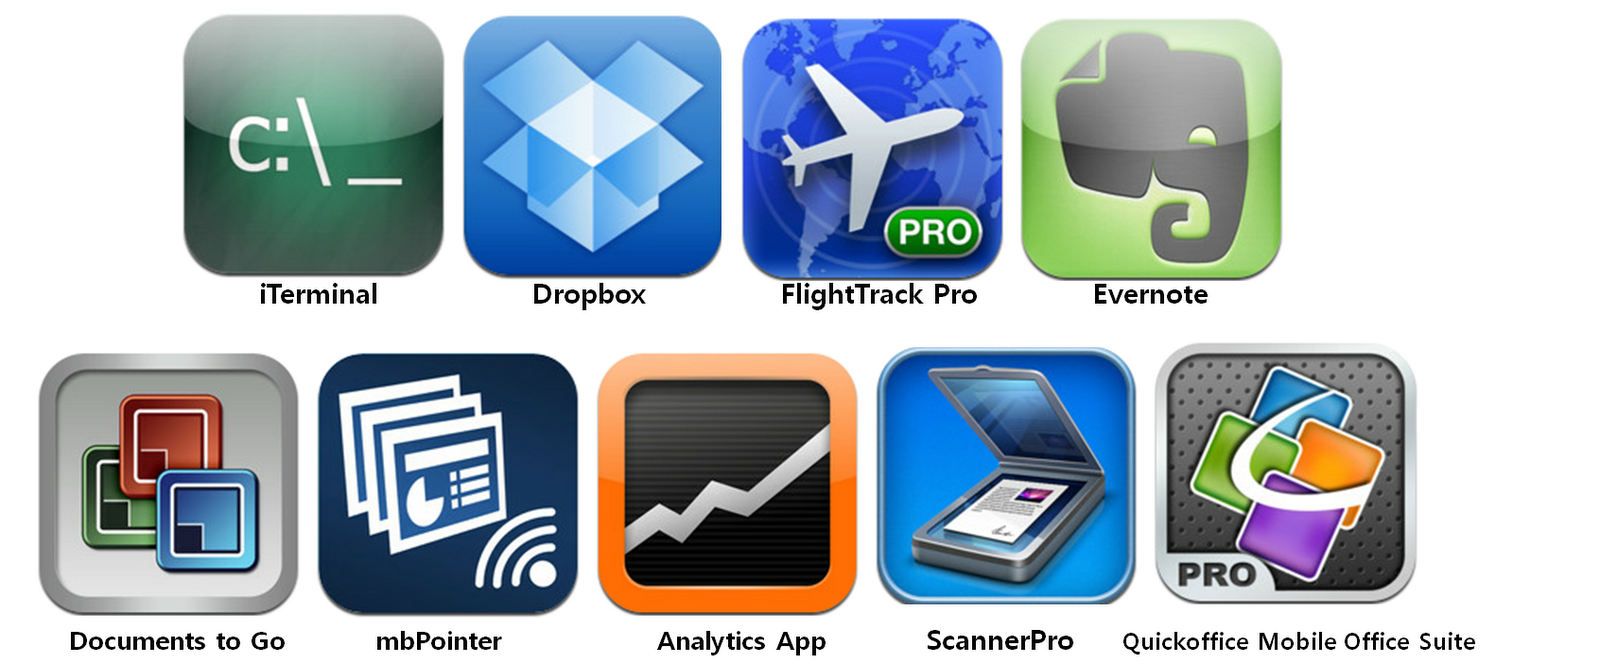 DIOTEK: 10 best iPhone apps for business users